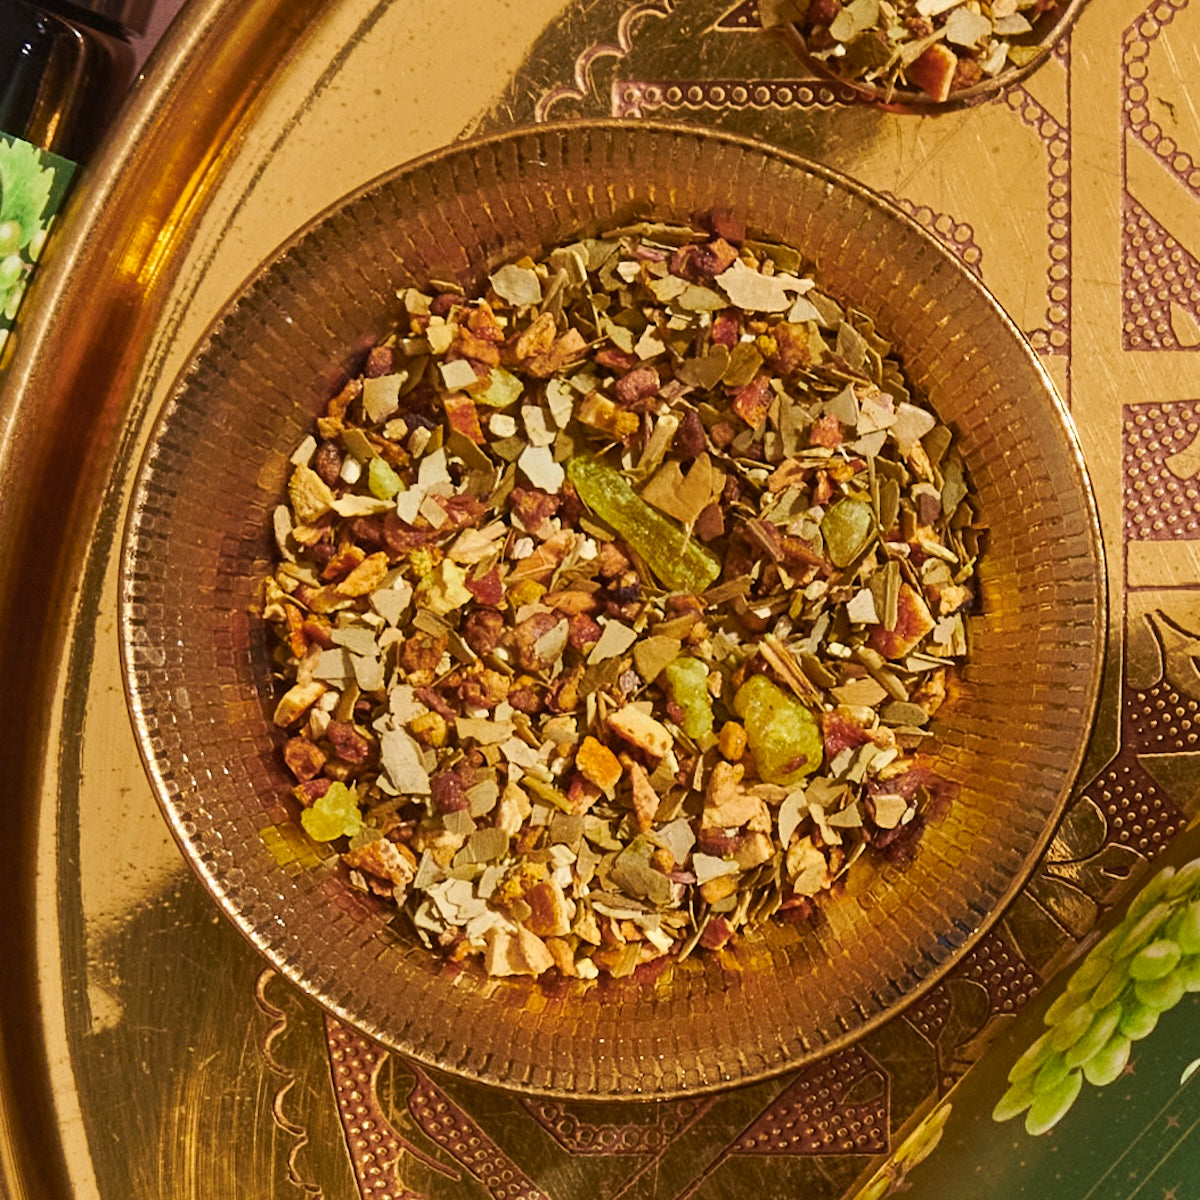 A close-up of a glass bowl filled with a colorful mixture of dried herbs, fruits, and spices. The bowl is set on an ornate, decorative golden tray with intricate patterns. The blend, reminiscent of Green Grape Yerba Mate: Cosmic Garden Iced Tea by Magic Hour, includes green, brown, and orange bits, indicating various ingredients.